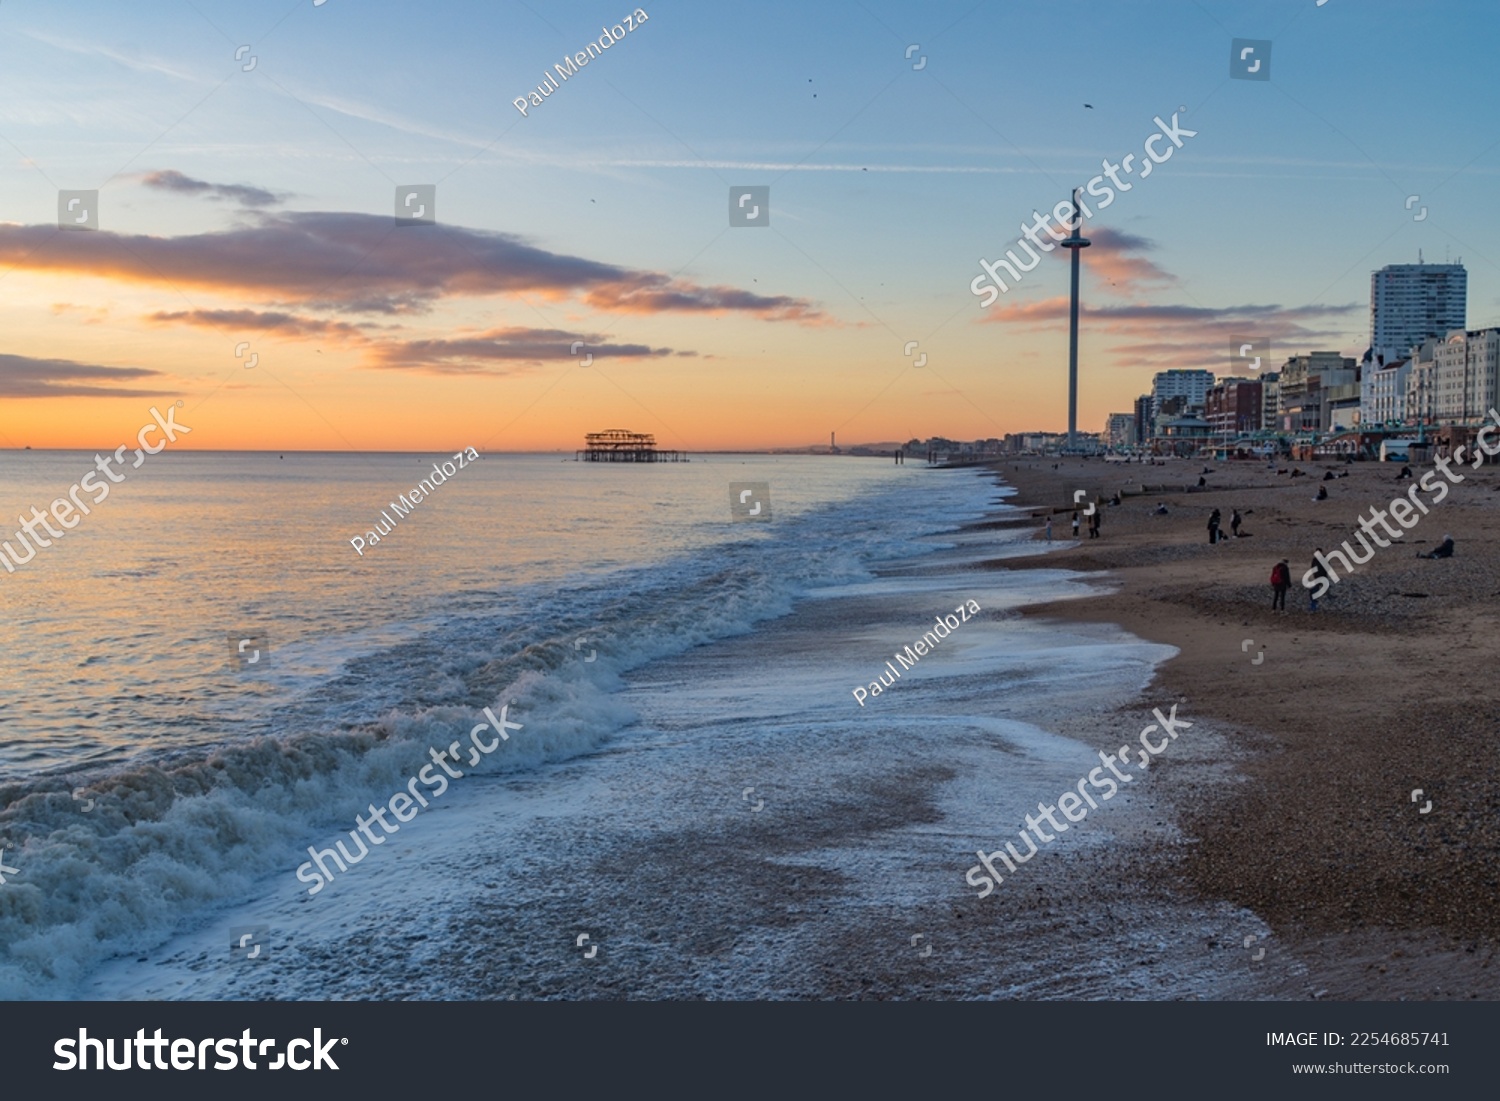 Brighton, UK - December 1st 2022: Brighton Beach during sunset with the i360 Observation Tower and derelict West Pier in the background. #2254685741